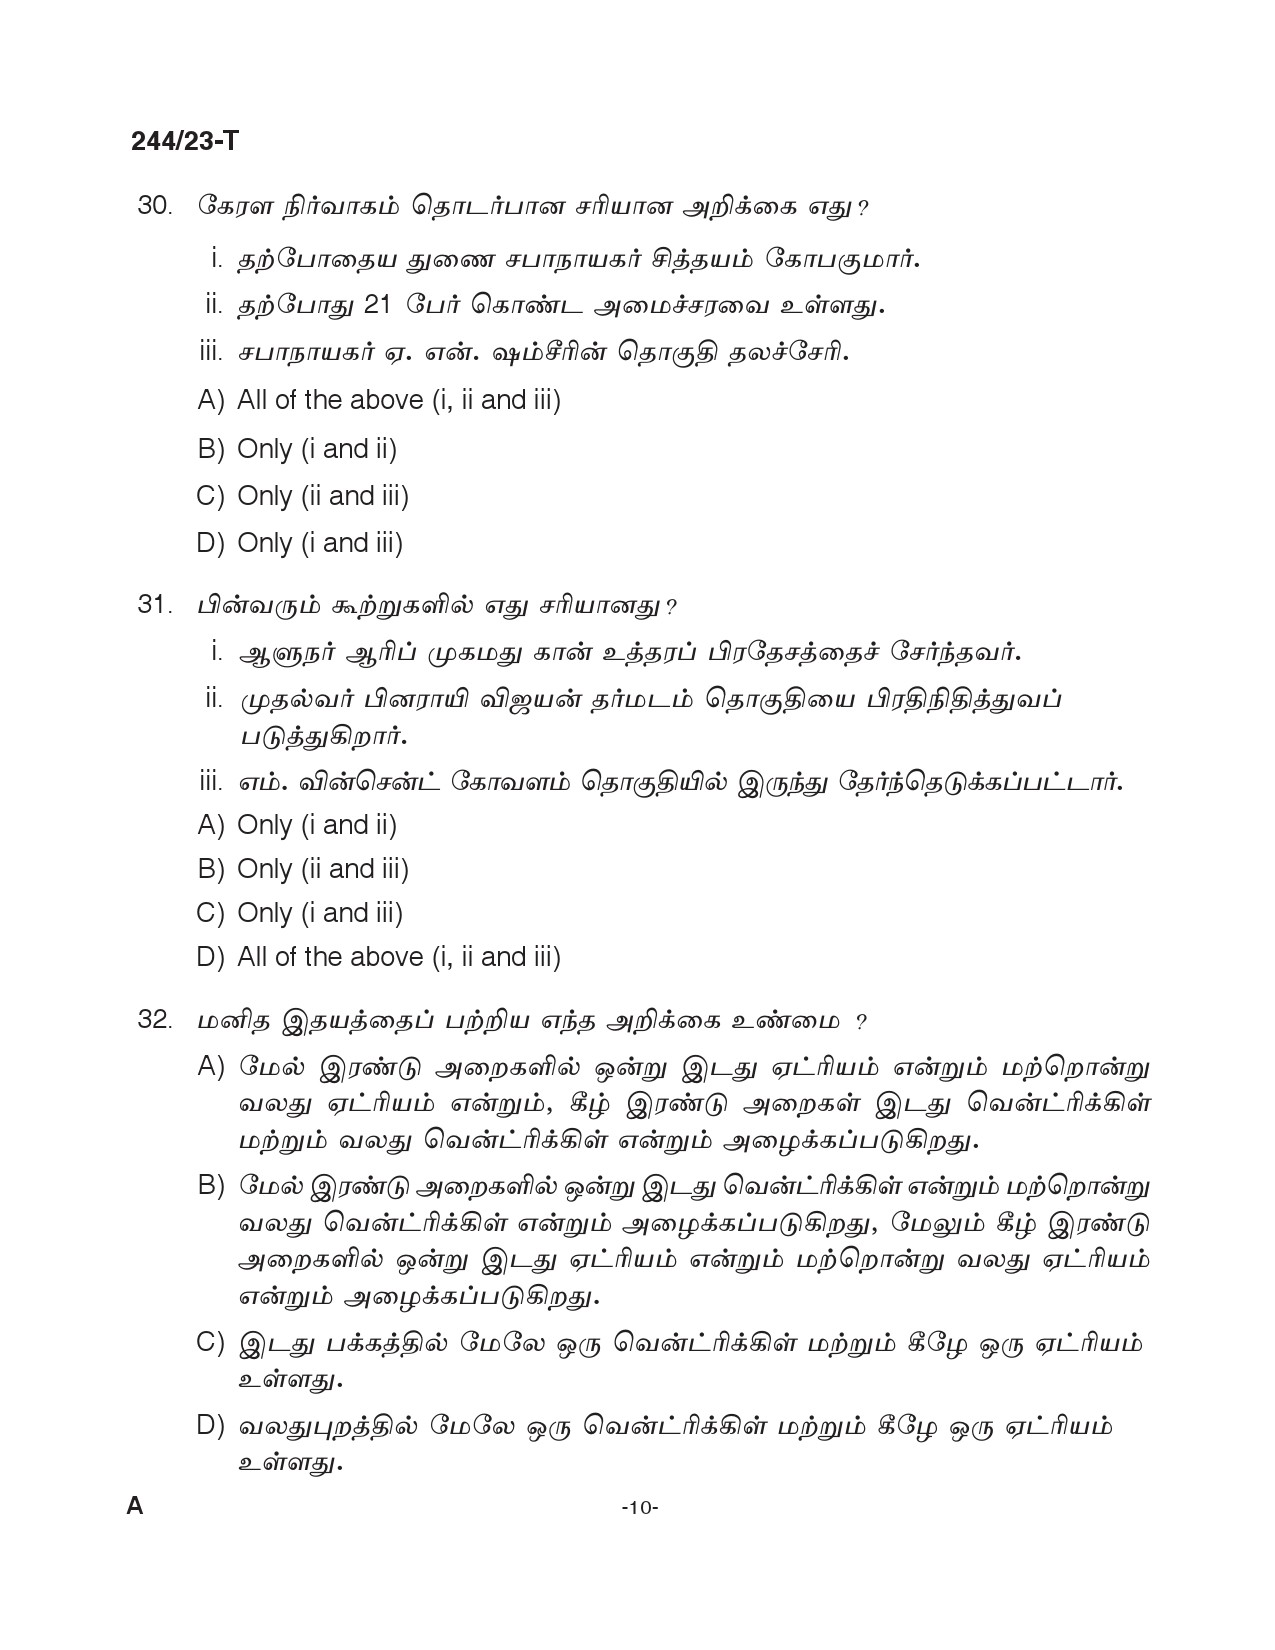 KPSC Fire and Rescue Officer Trainee Tamil Exam 2023 Code 2442023 T 9